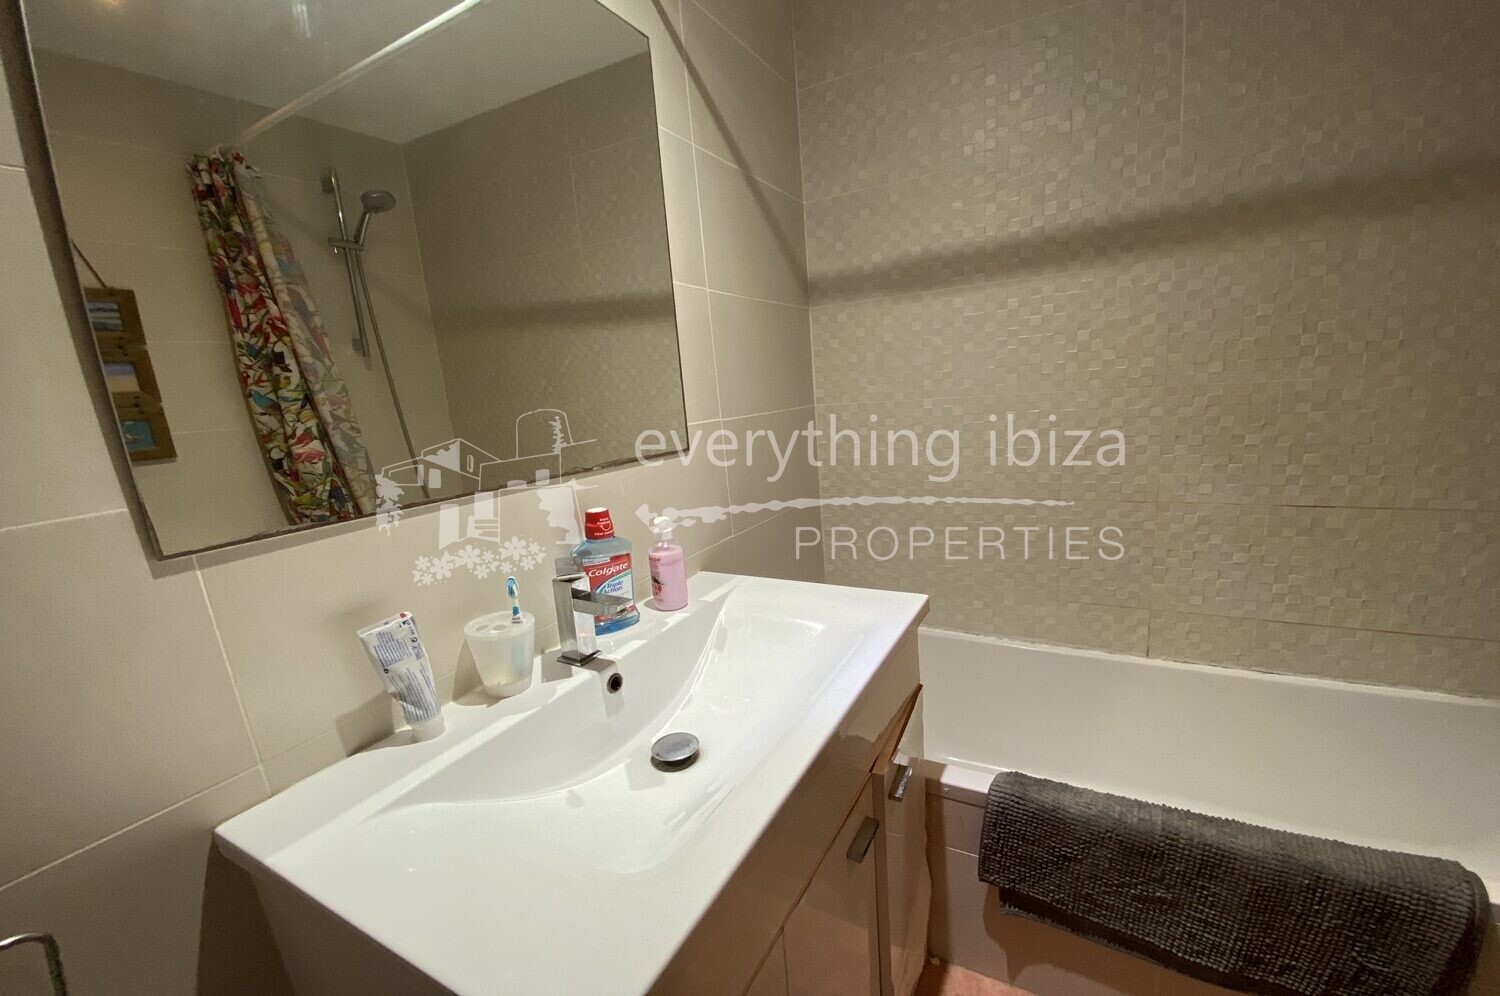 Spacious Ground Floor Family Apartment, ref. 1368, for sale in Ibiza by everything ibiza Properties